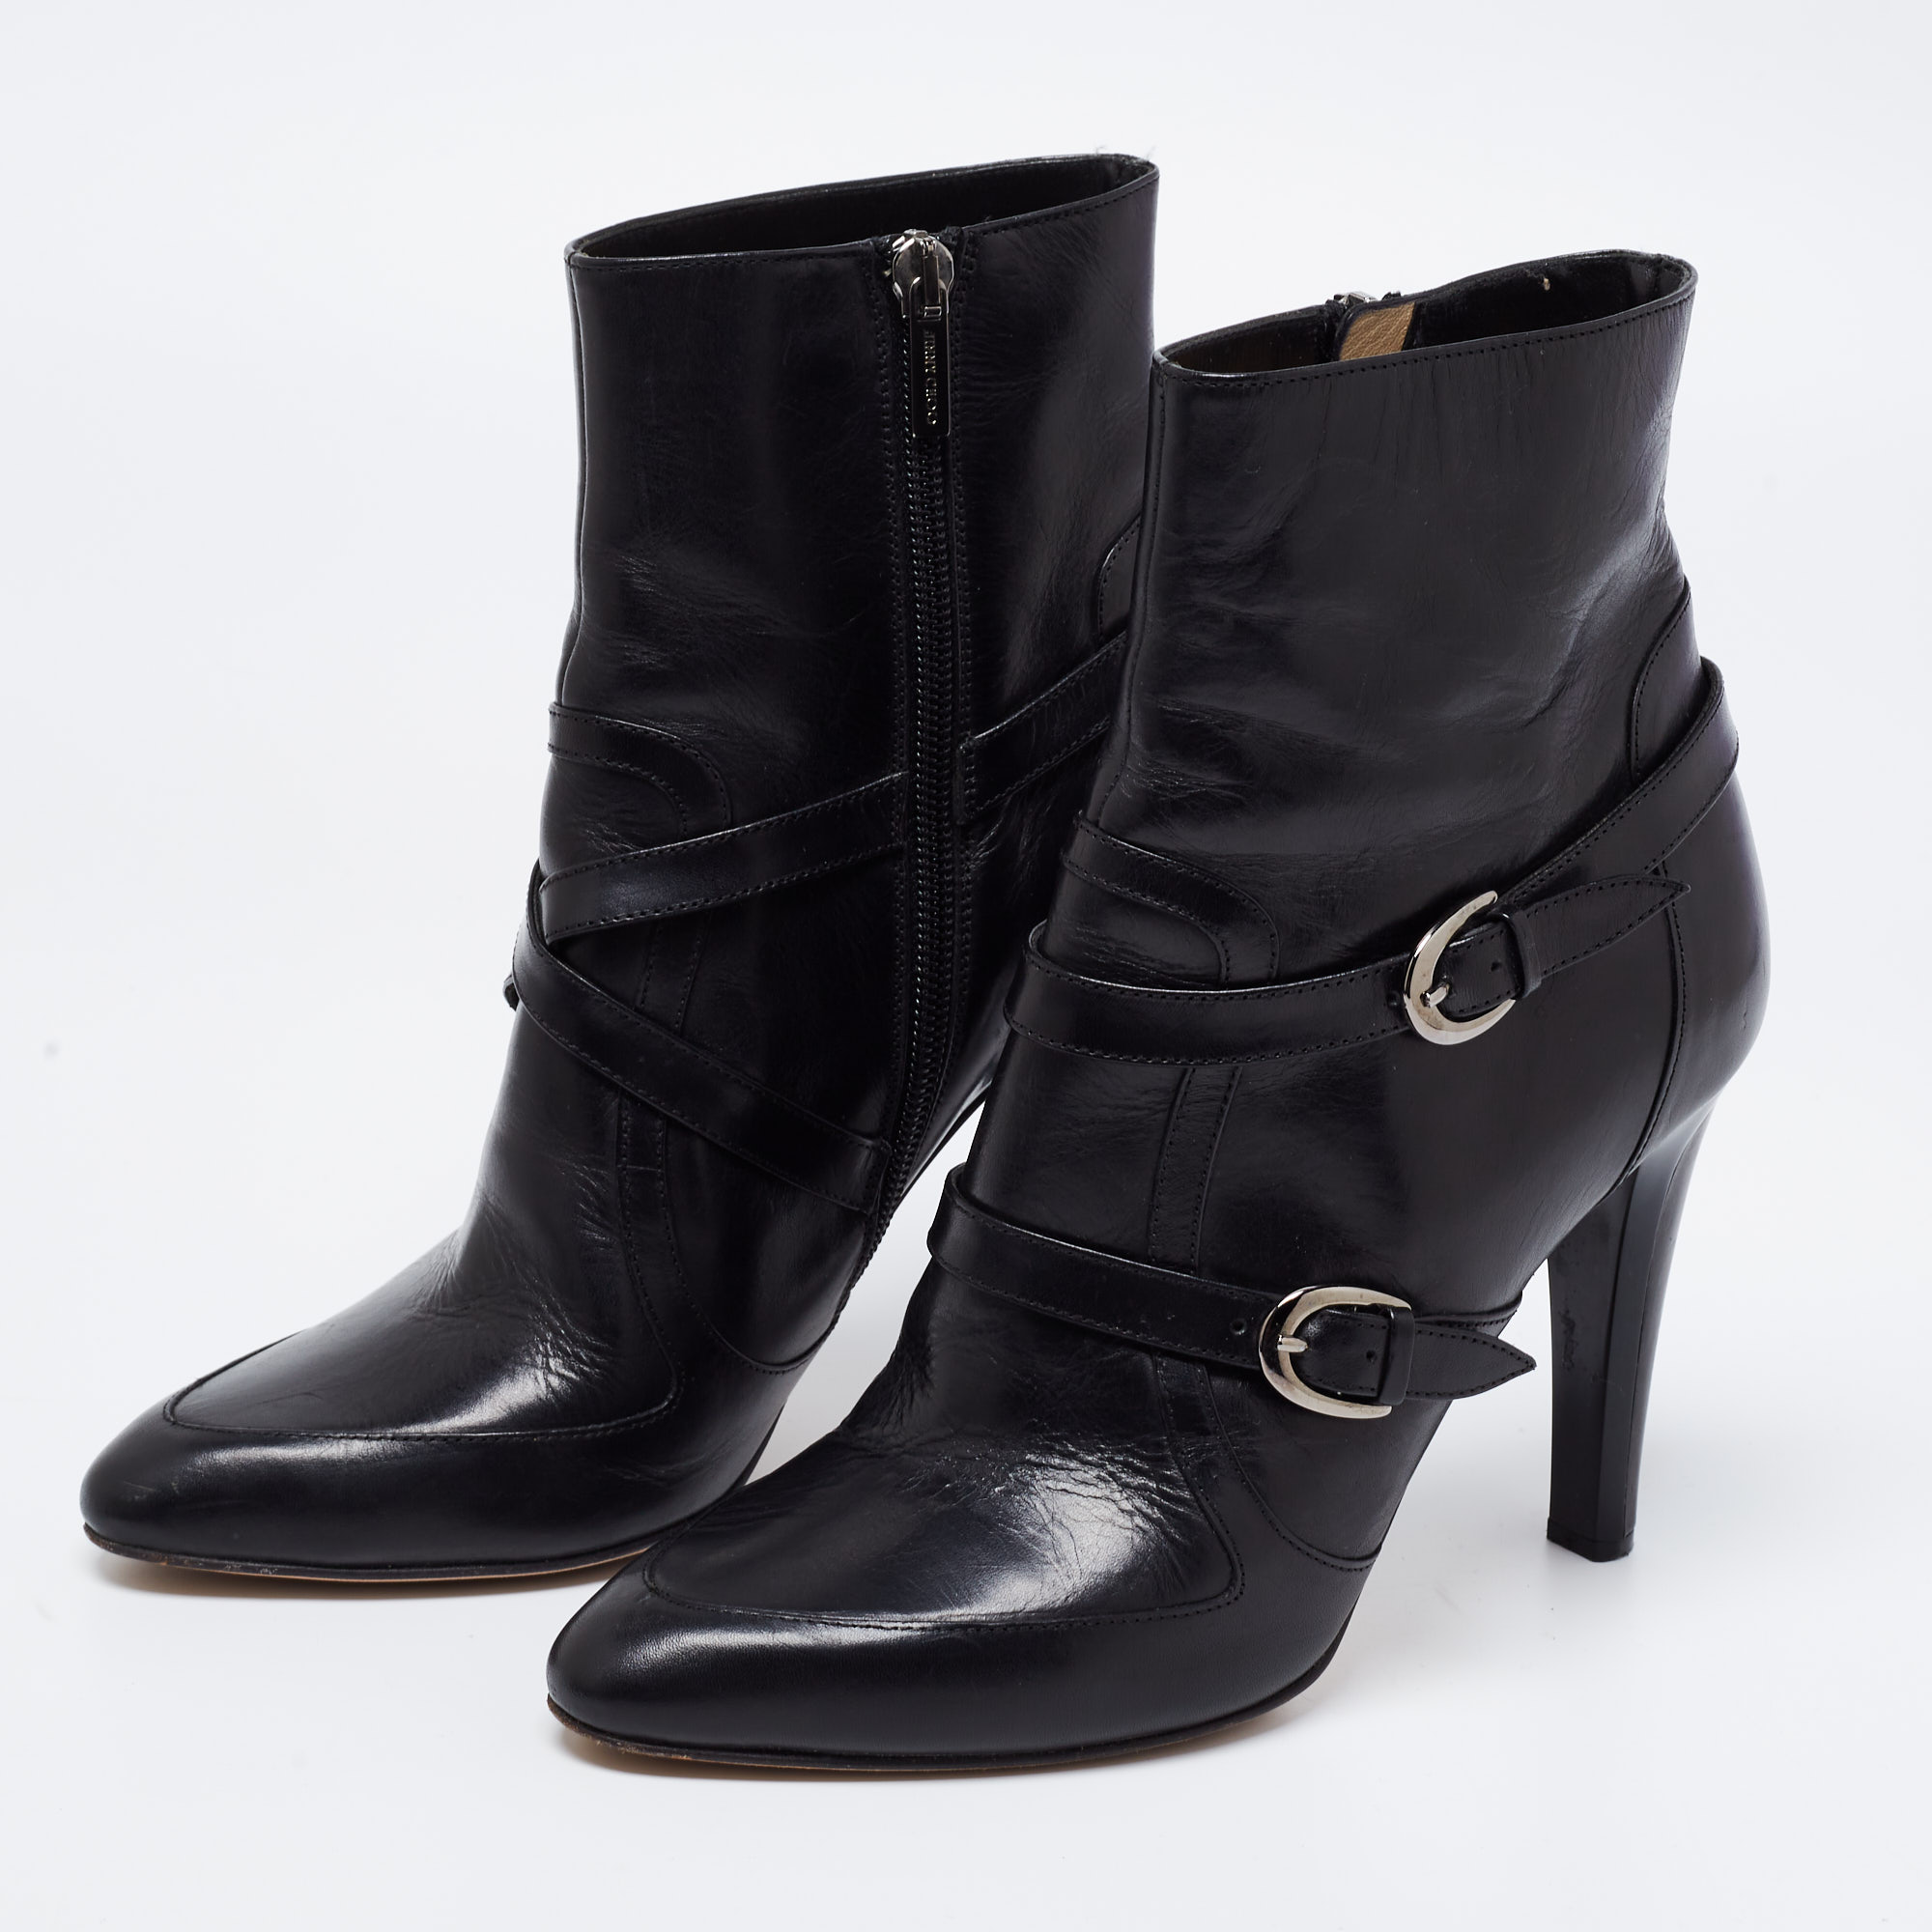 

Jimmy Choo Black Leather Buckle Detail Ankle Booties Size